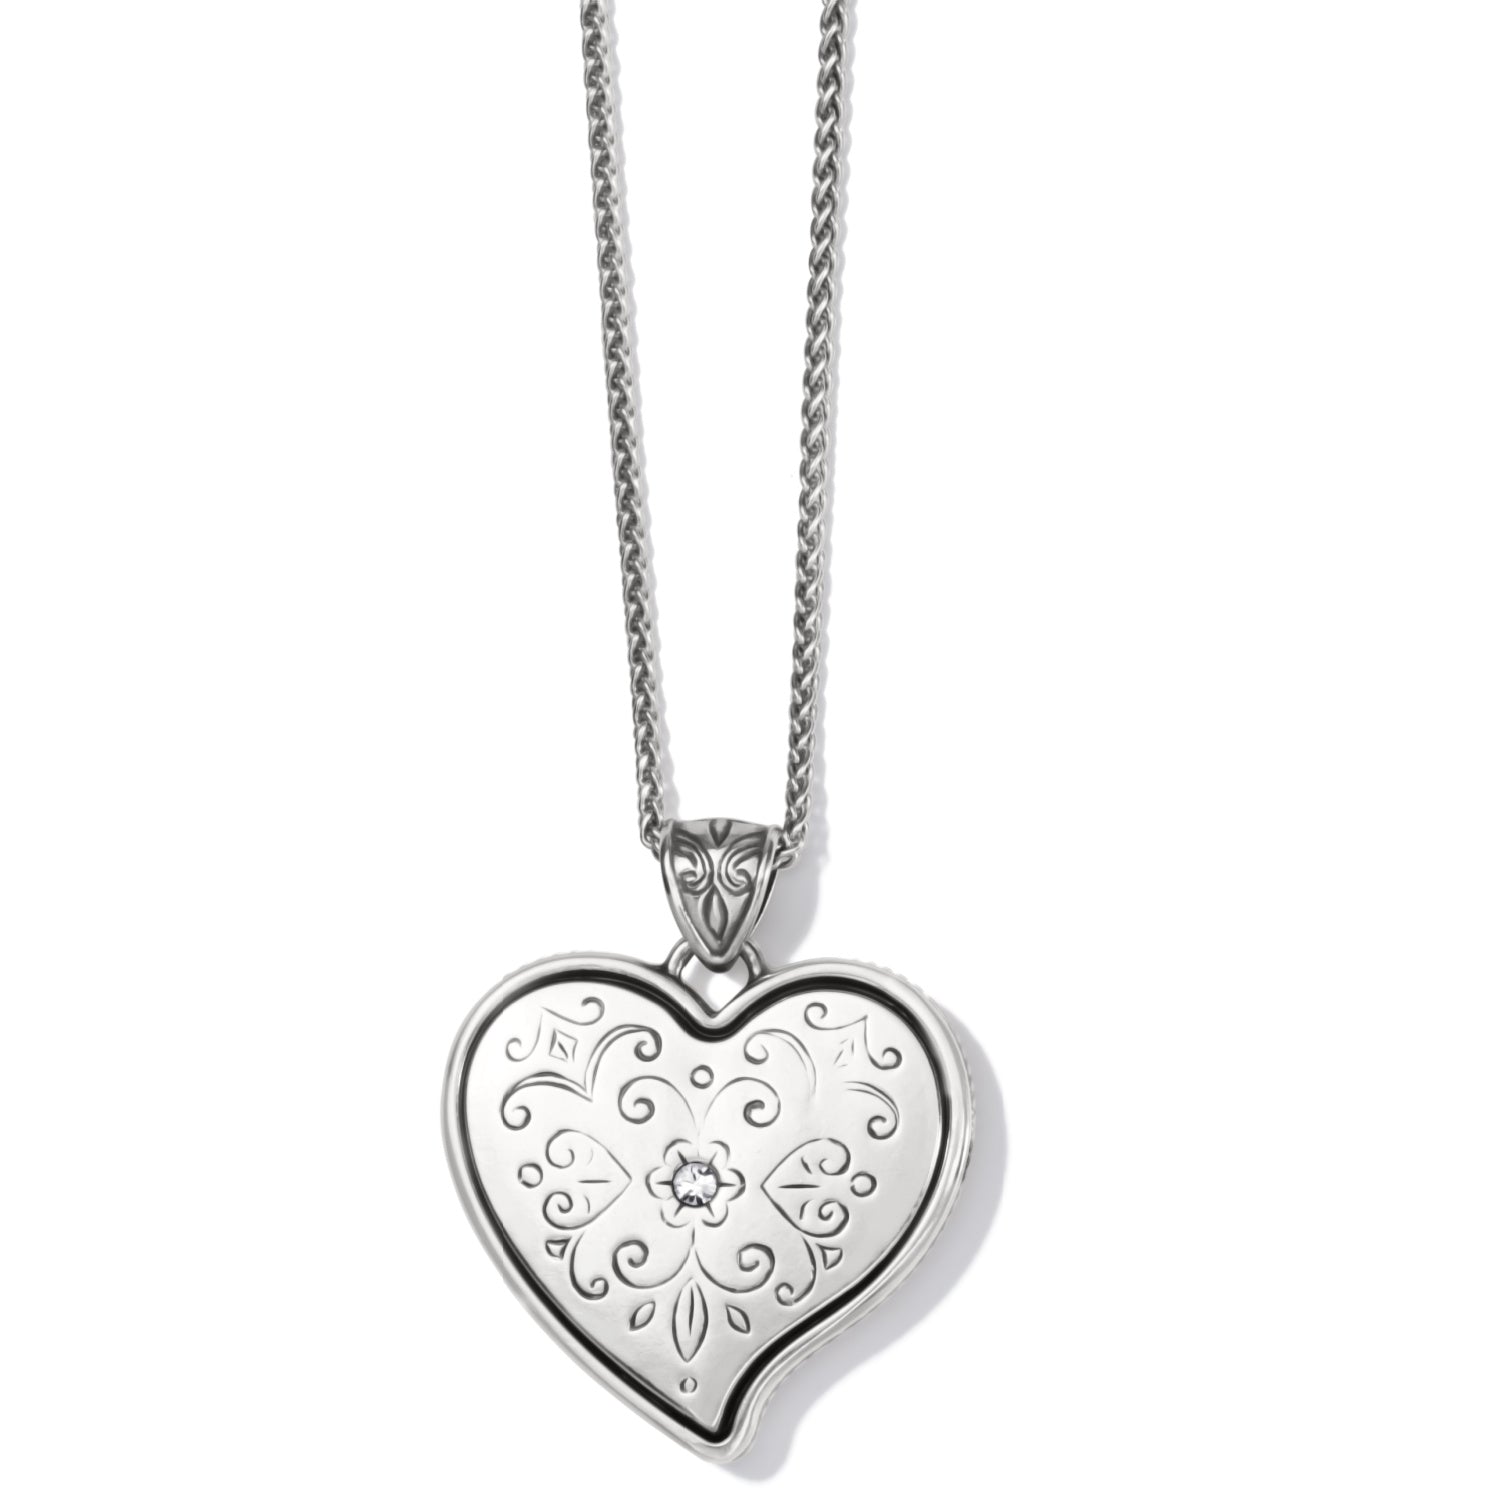 Ornate Heart Convertible Necklace